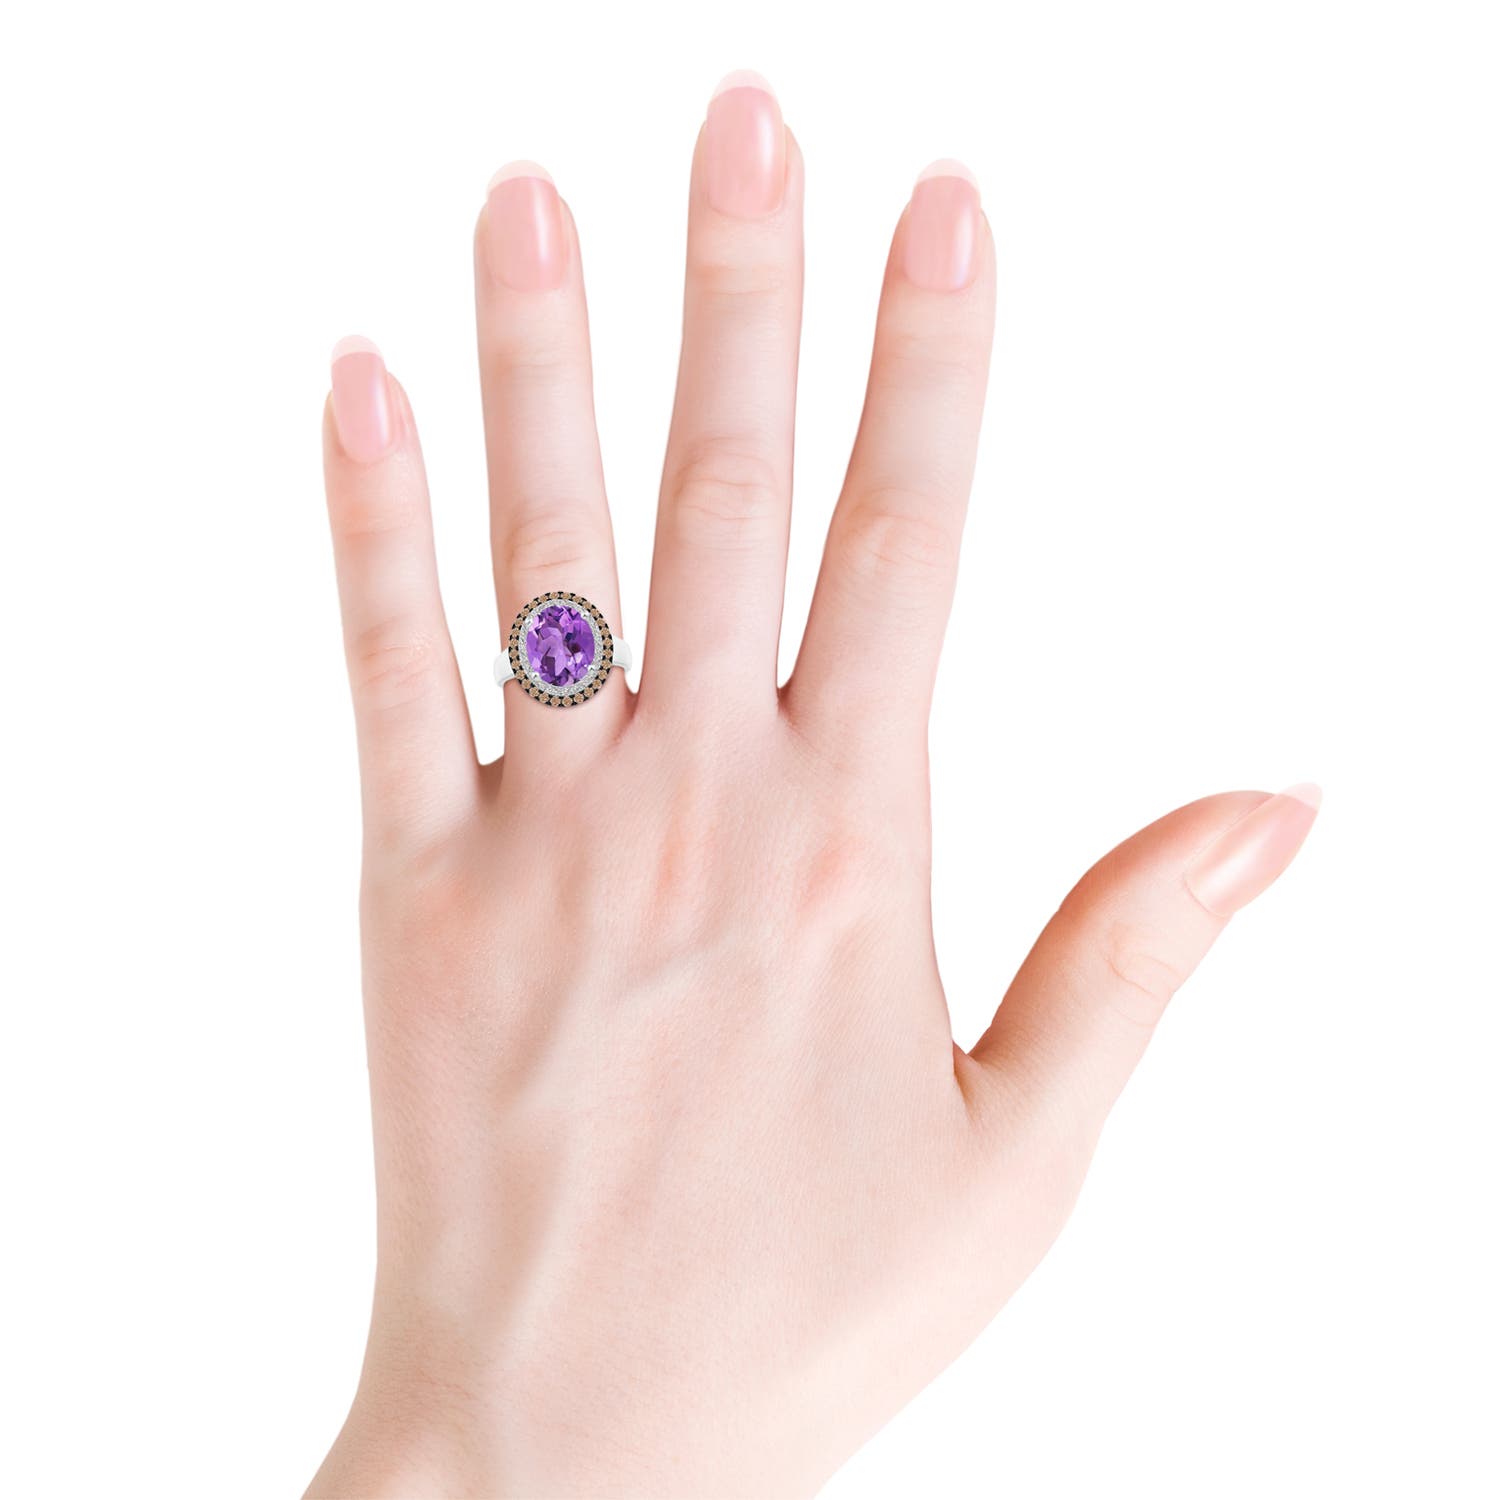 AA - Amethyst / 3.71 CT / 14 KT White Gold